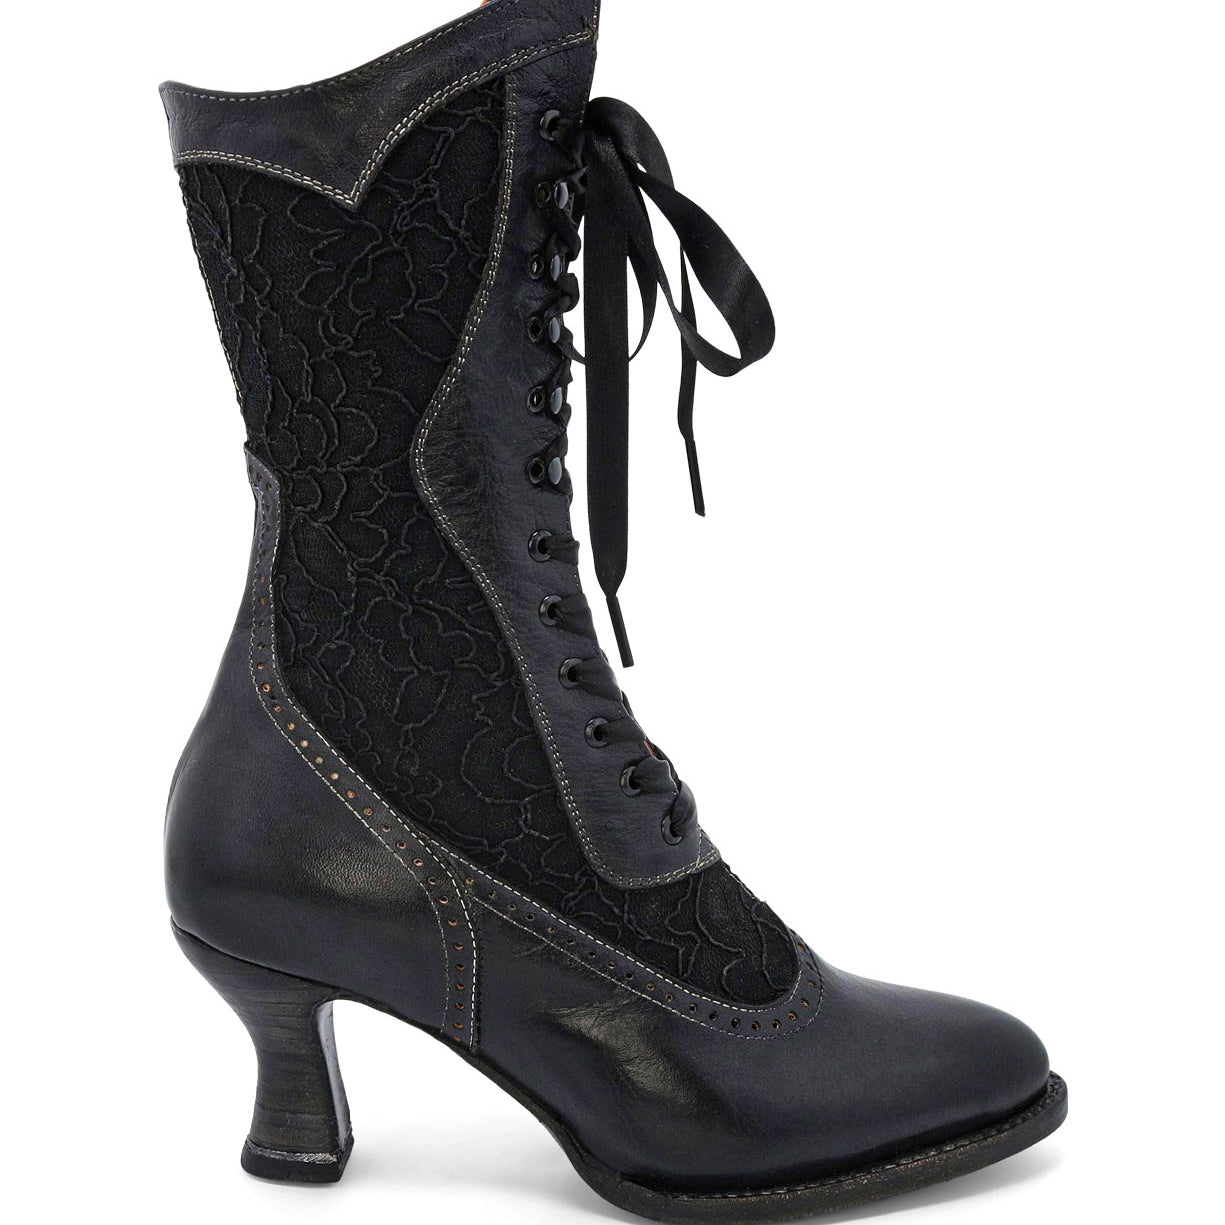 A hand crafted Abigale black lace-up leather boot by Oak Tree Farms.